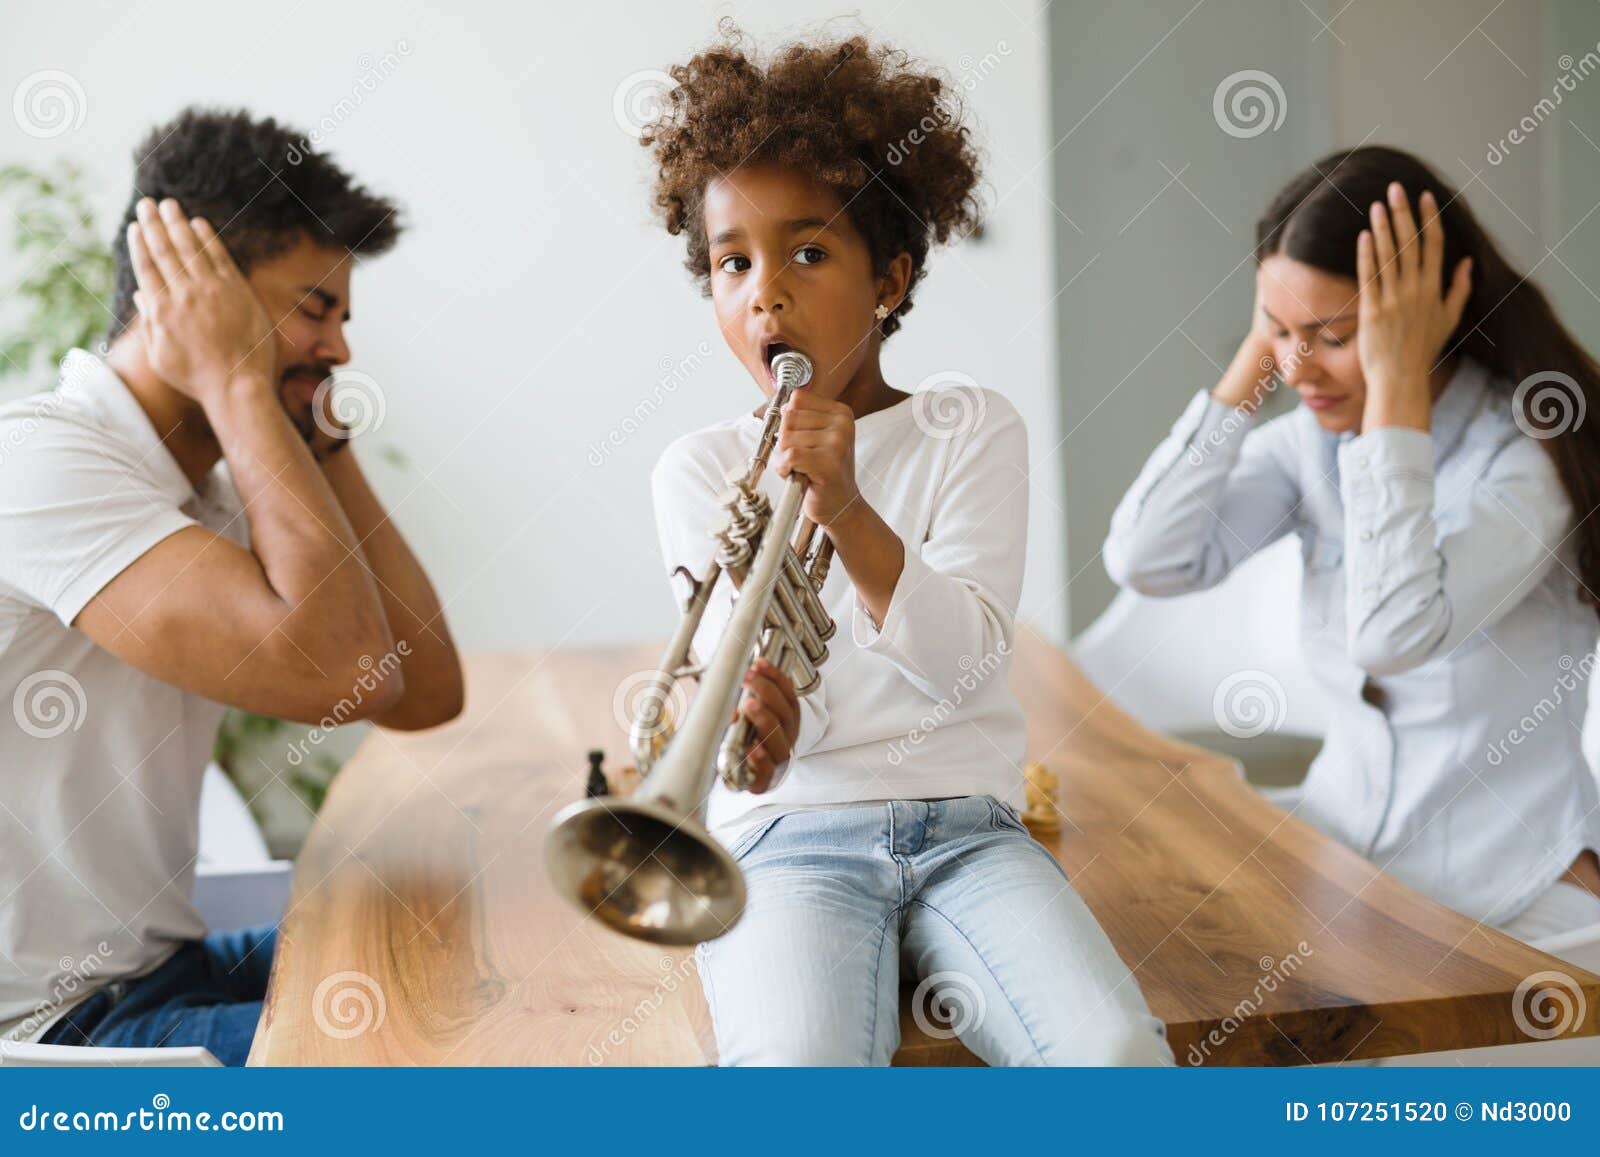 picture of child making noise by playing trumpet